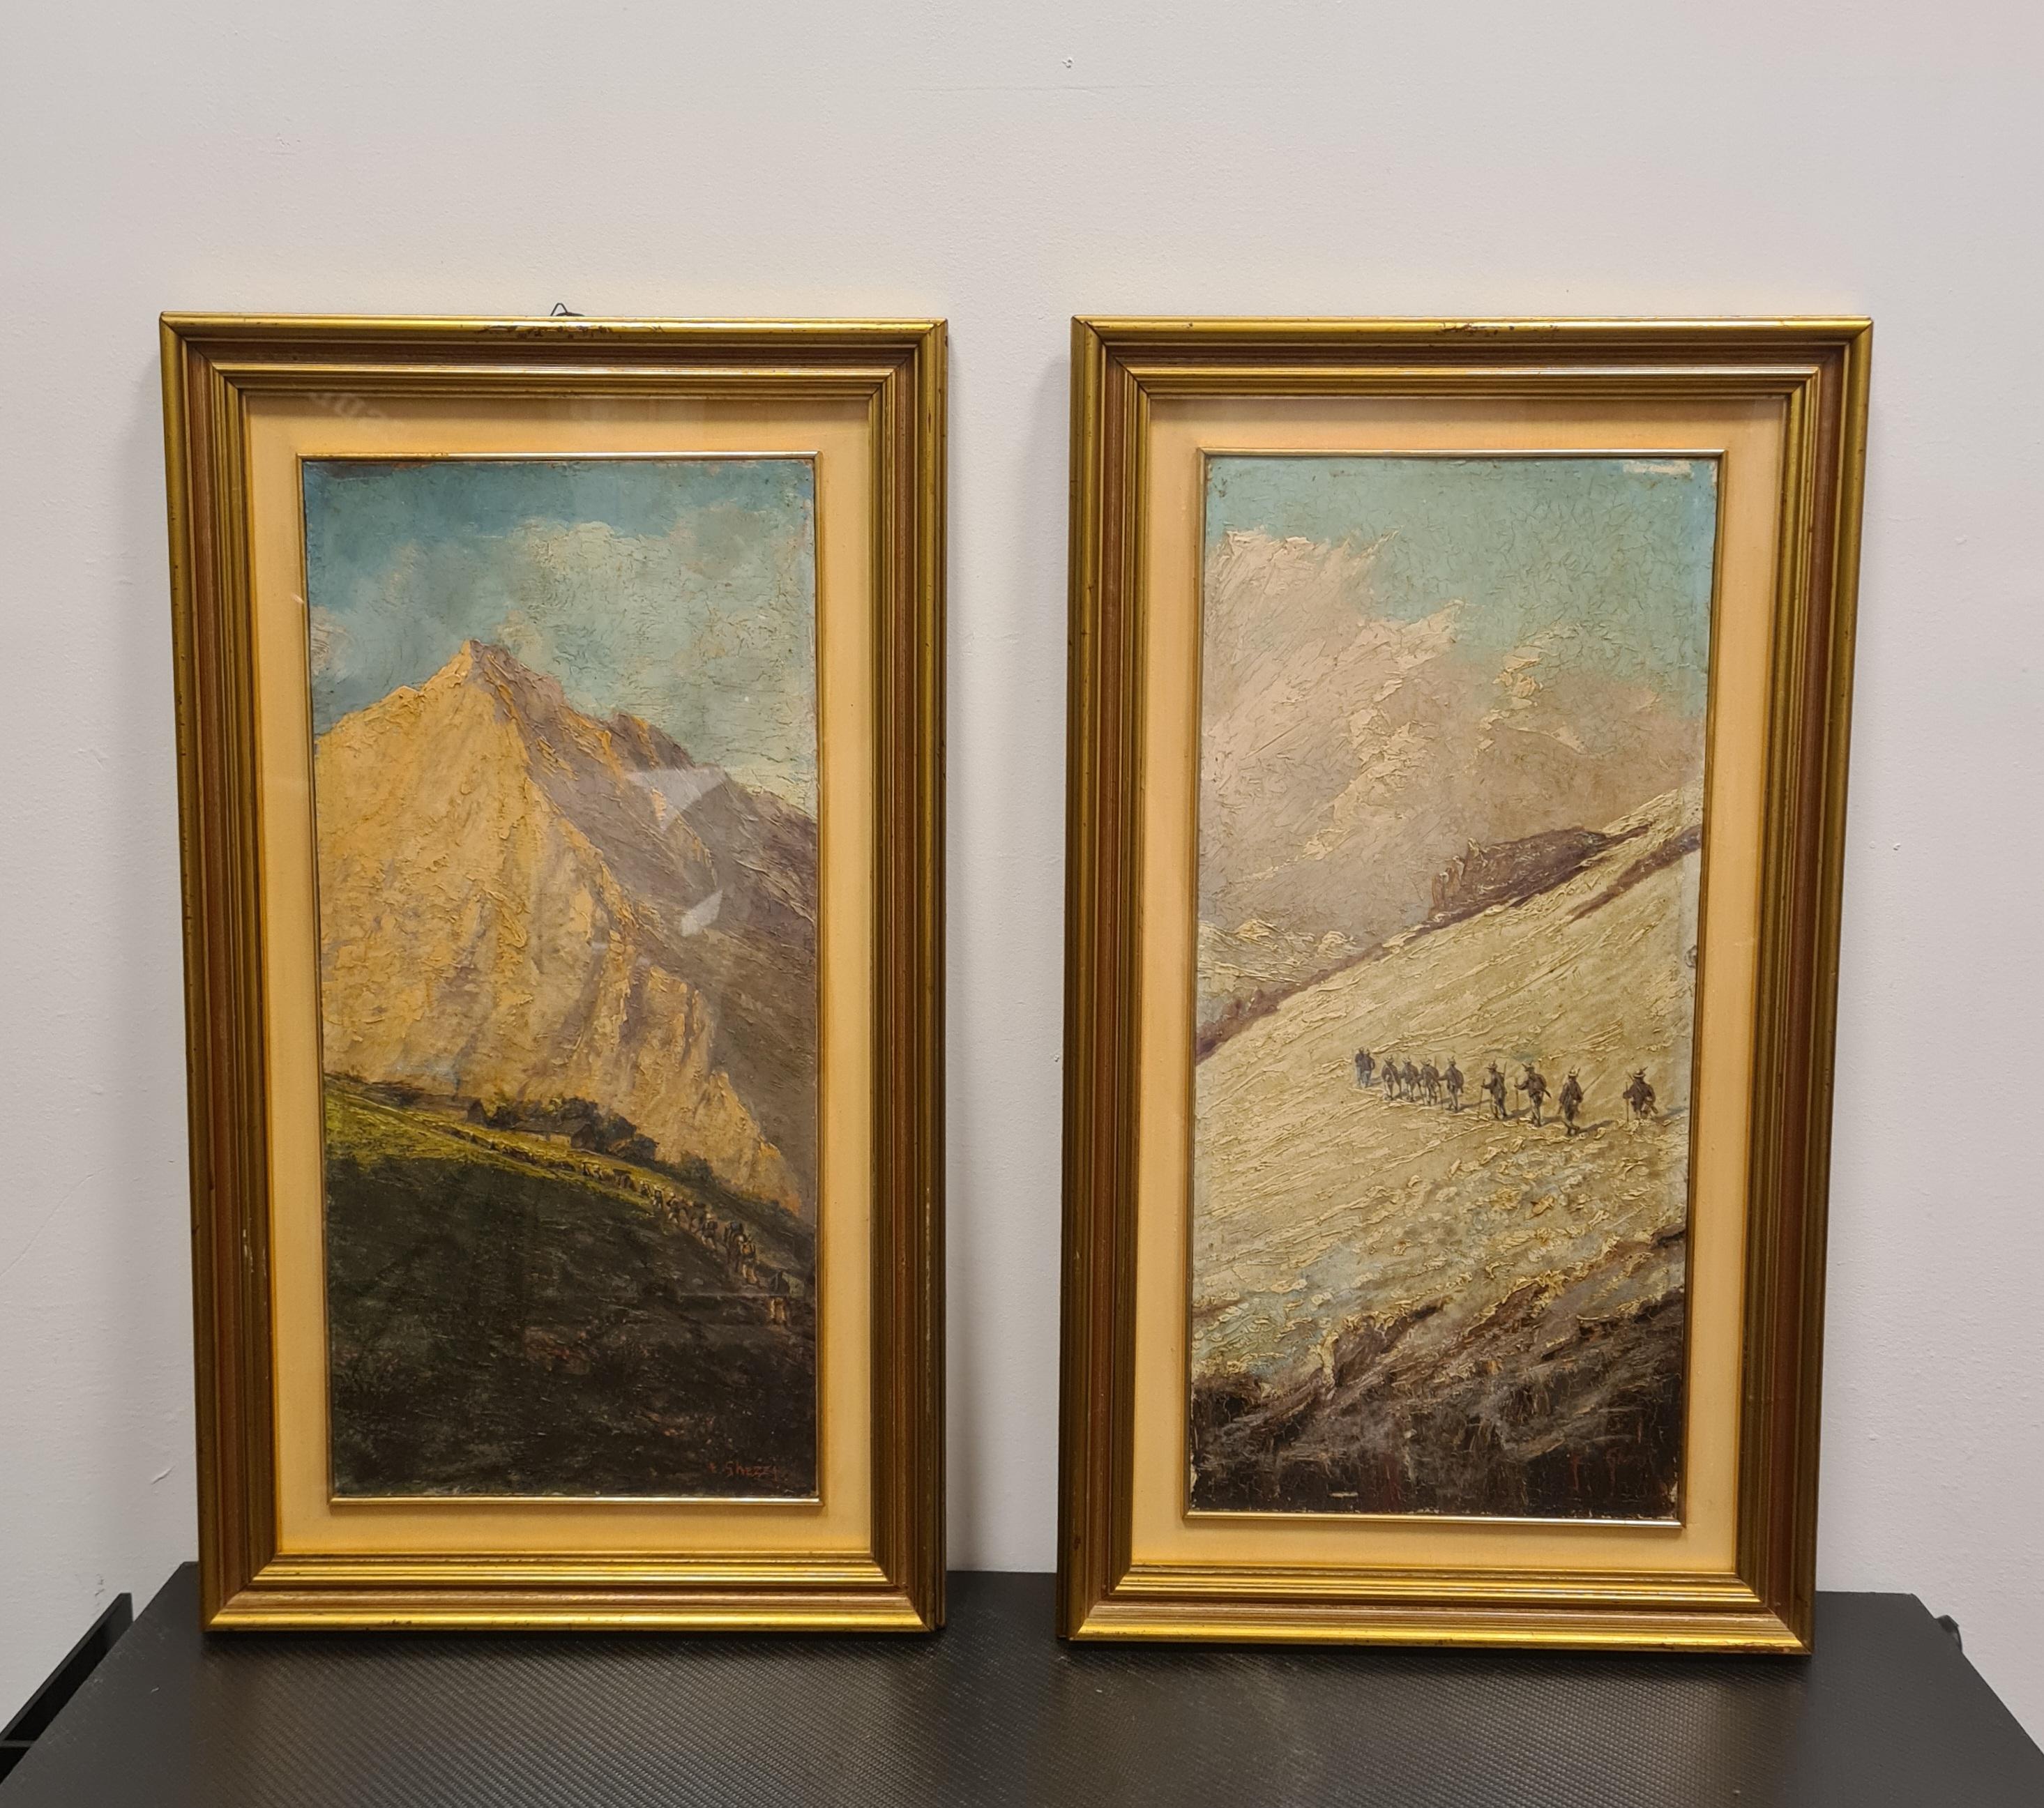 Pair of paintings depicting mountain landscape.

Two oil on panel paintings depicting roped parties of climbers probably walking the same mountain trail in winter and summer.

The summer picture has the imposing mountain still snow-capped as a